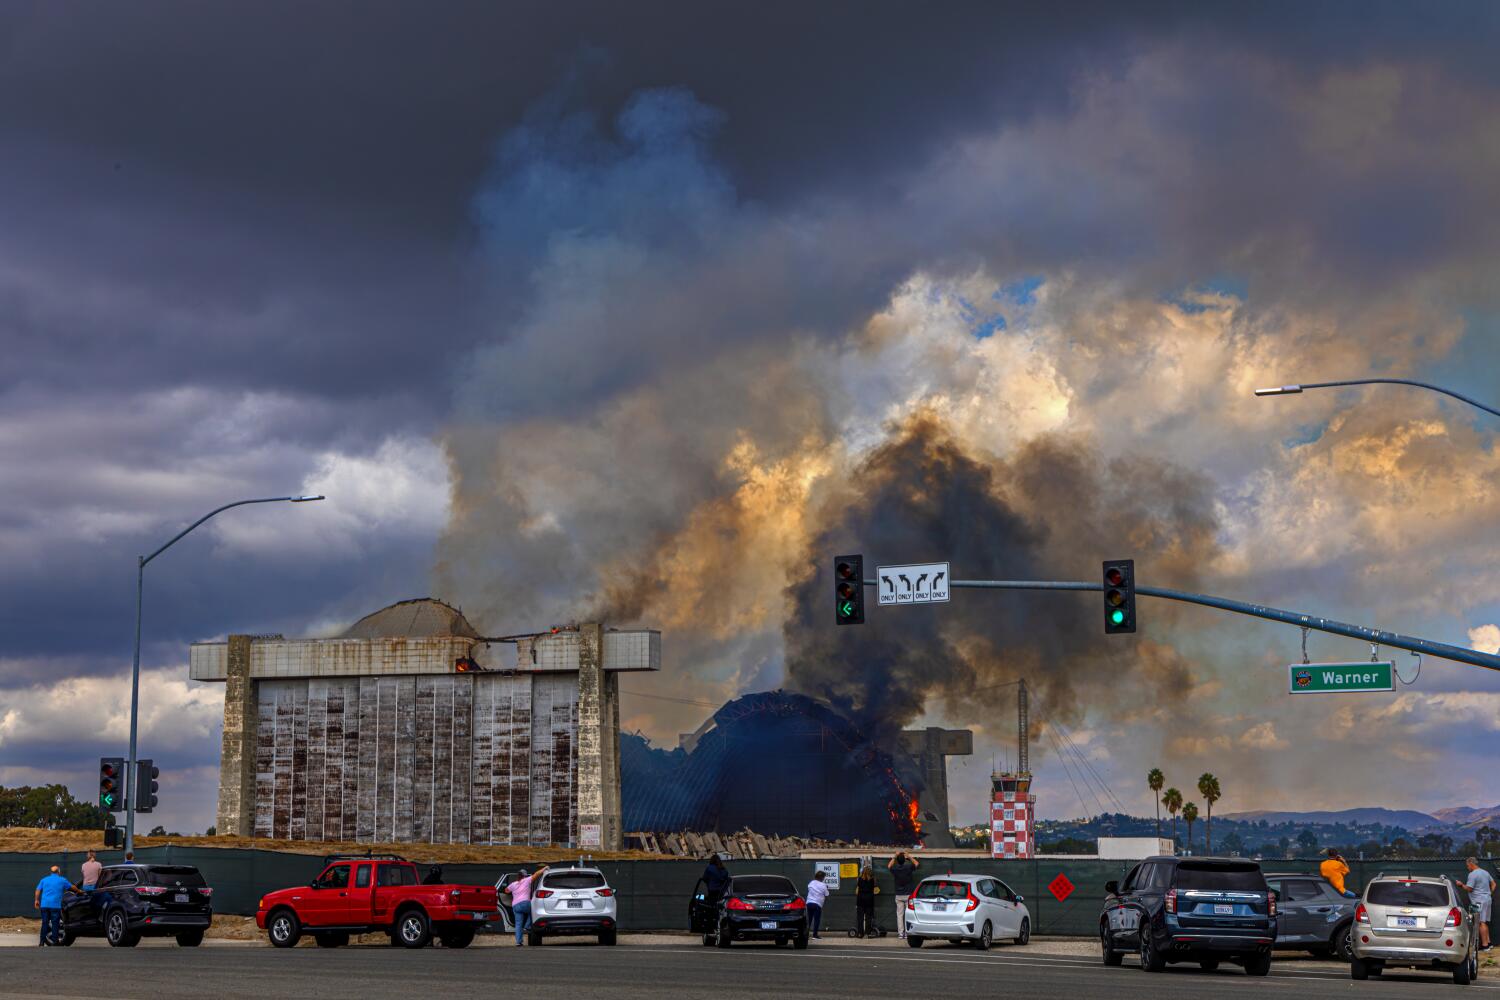 Fire burning what's left of Tustin hangar could stall abatement. Schools remain closed